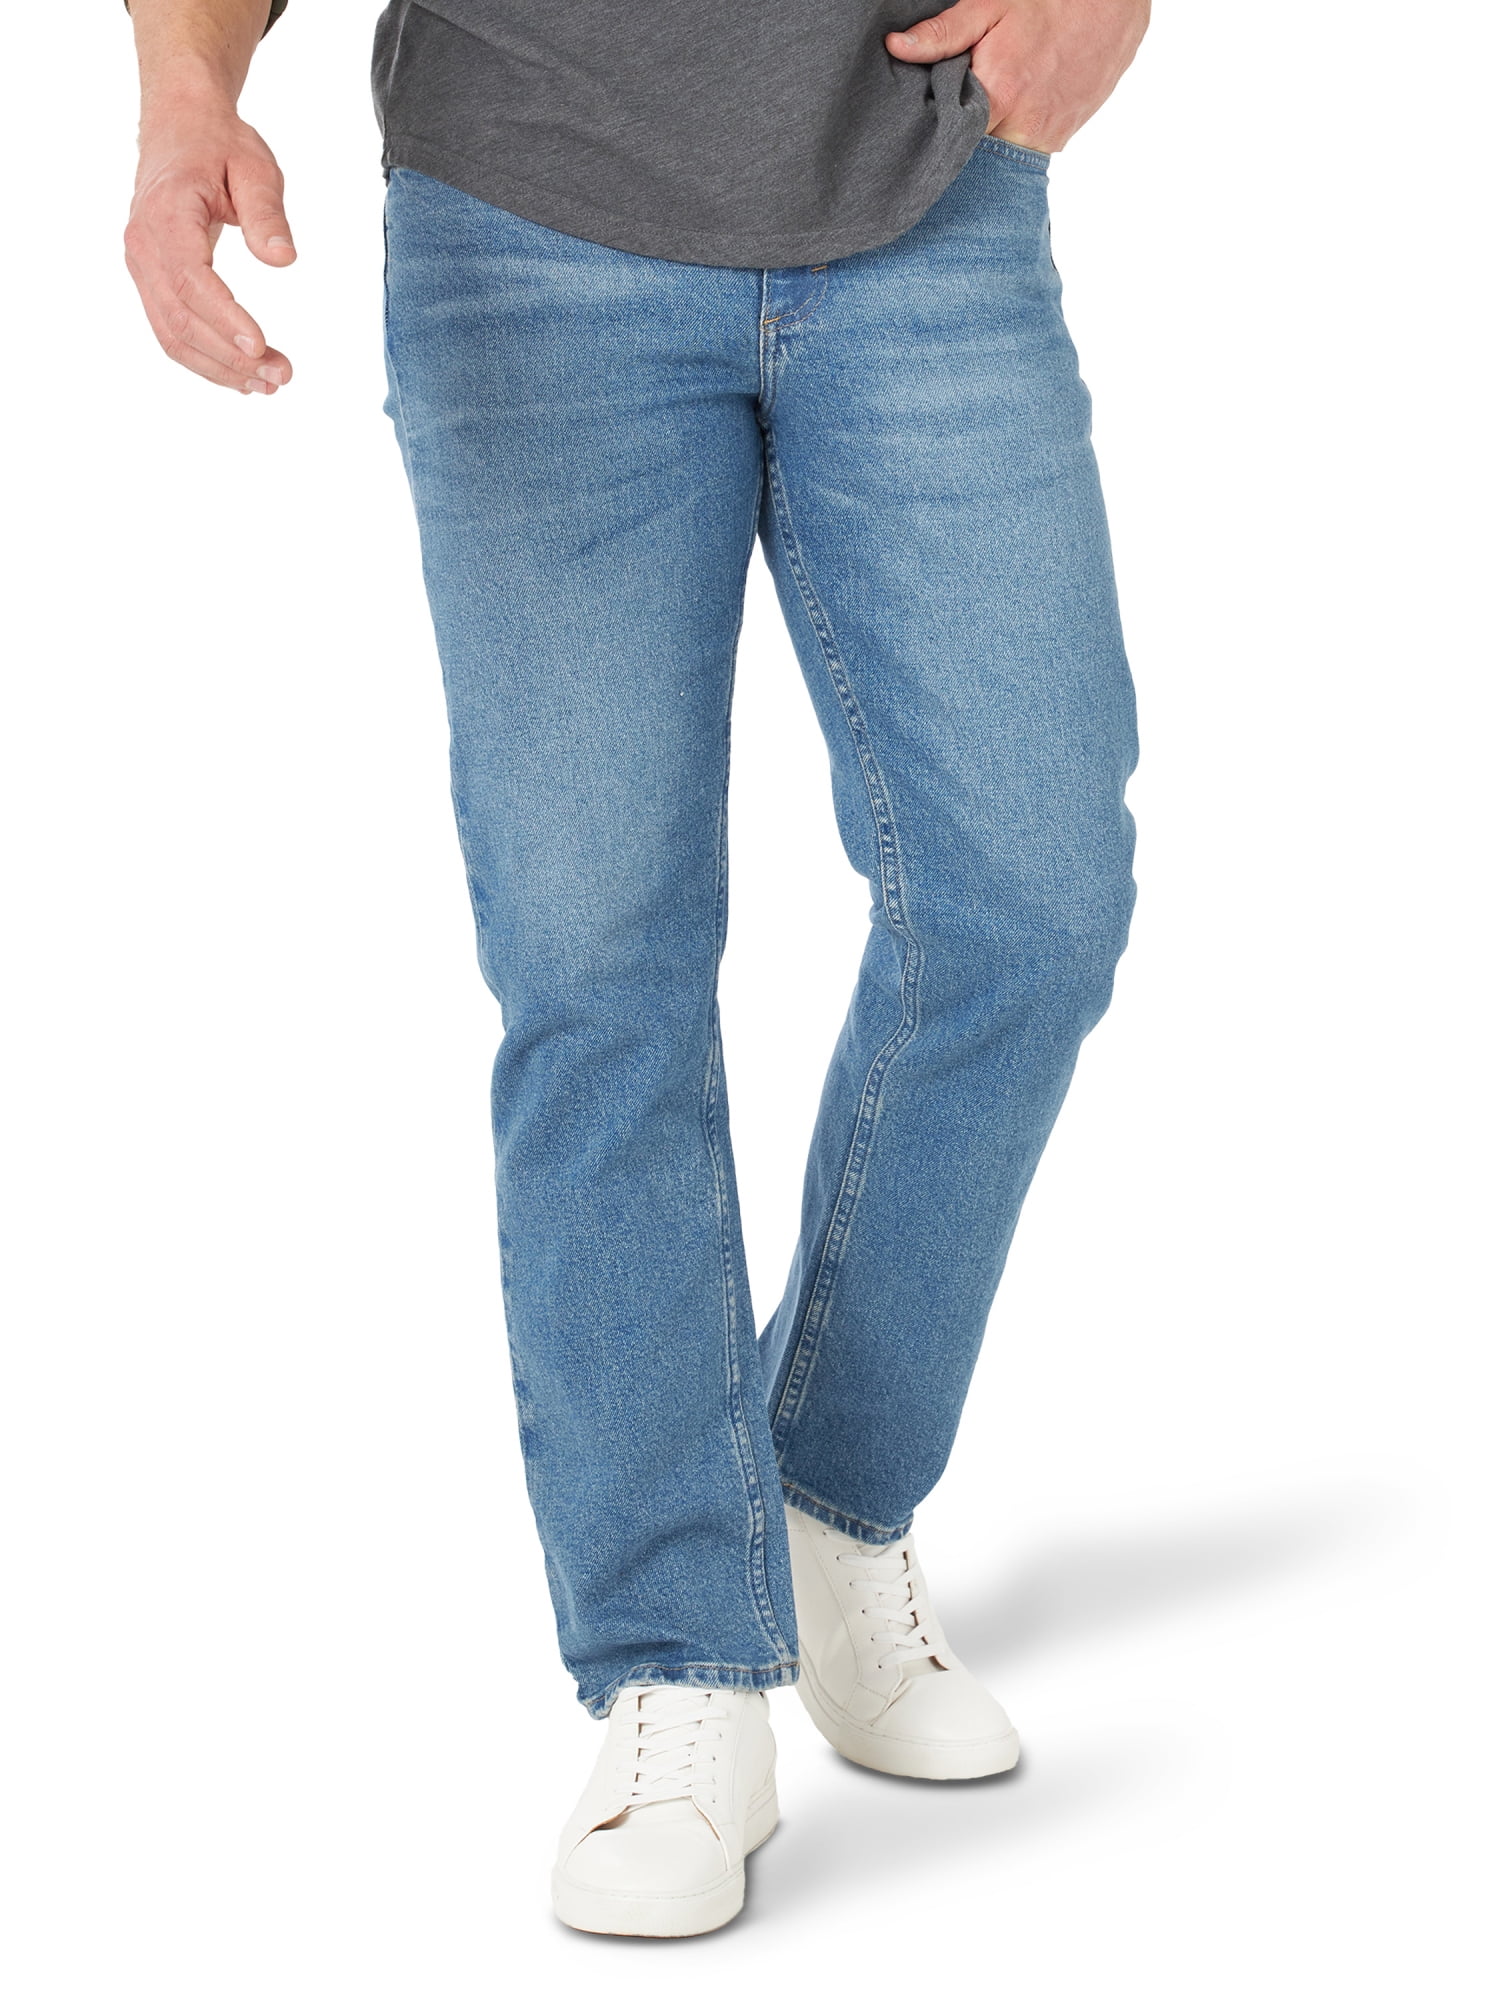 Lure demonstration Forinden Wrangler Men's and Big Men's Relaxed Fit Jeans with Flex - Walmart.com